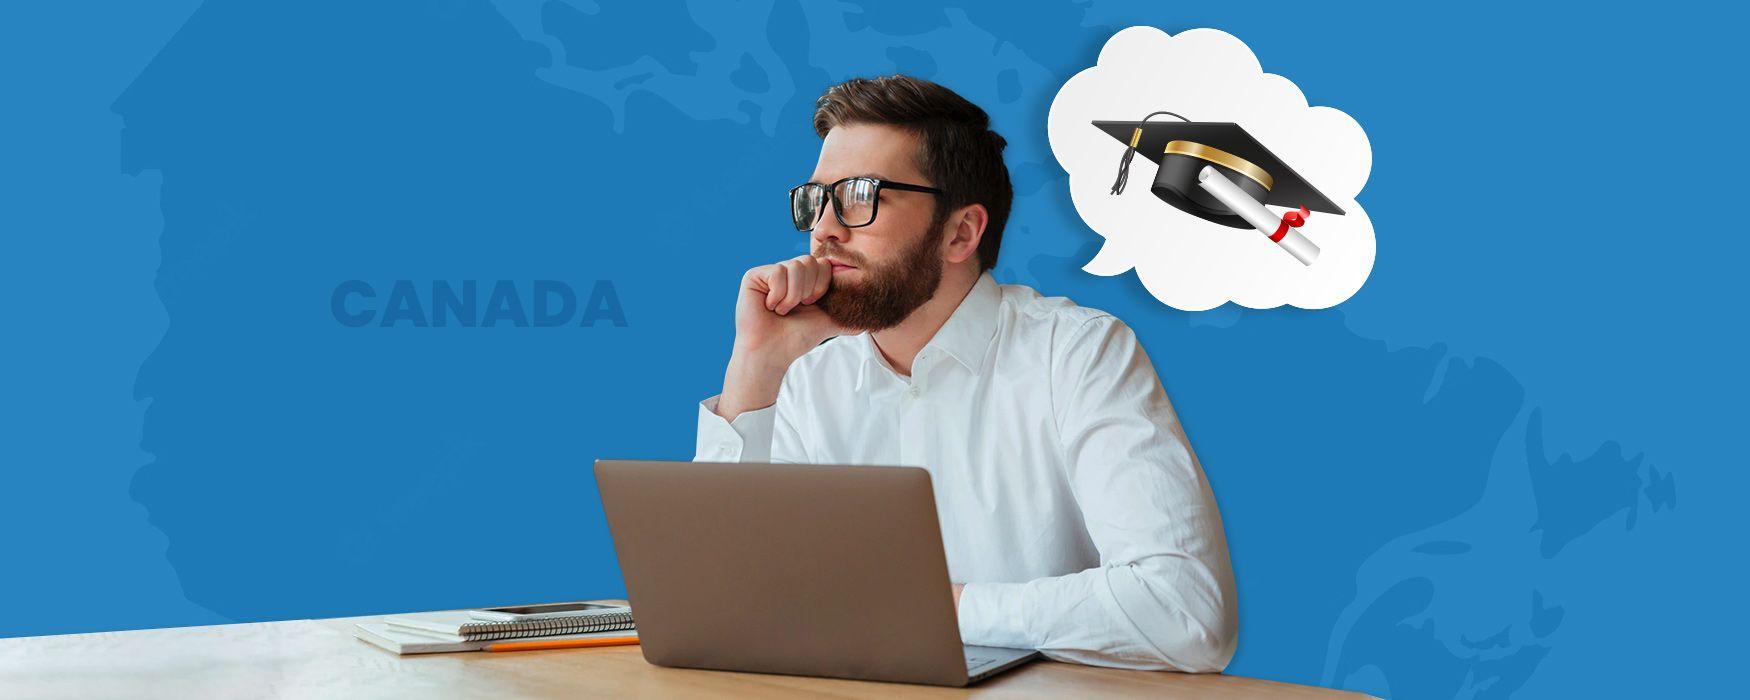 online business phd in canada